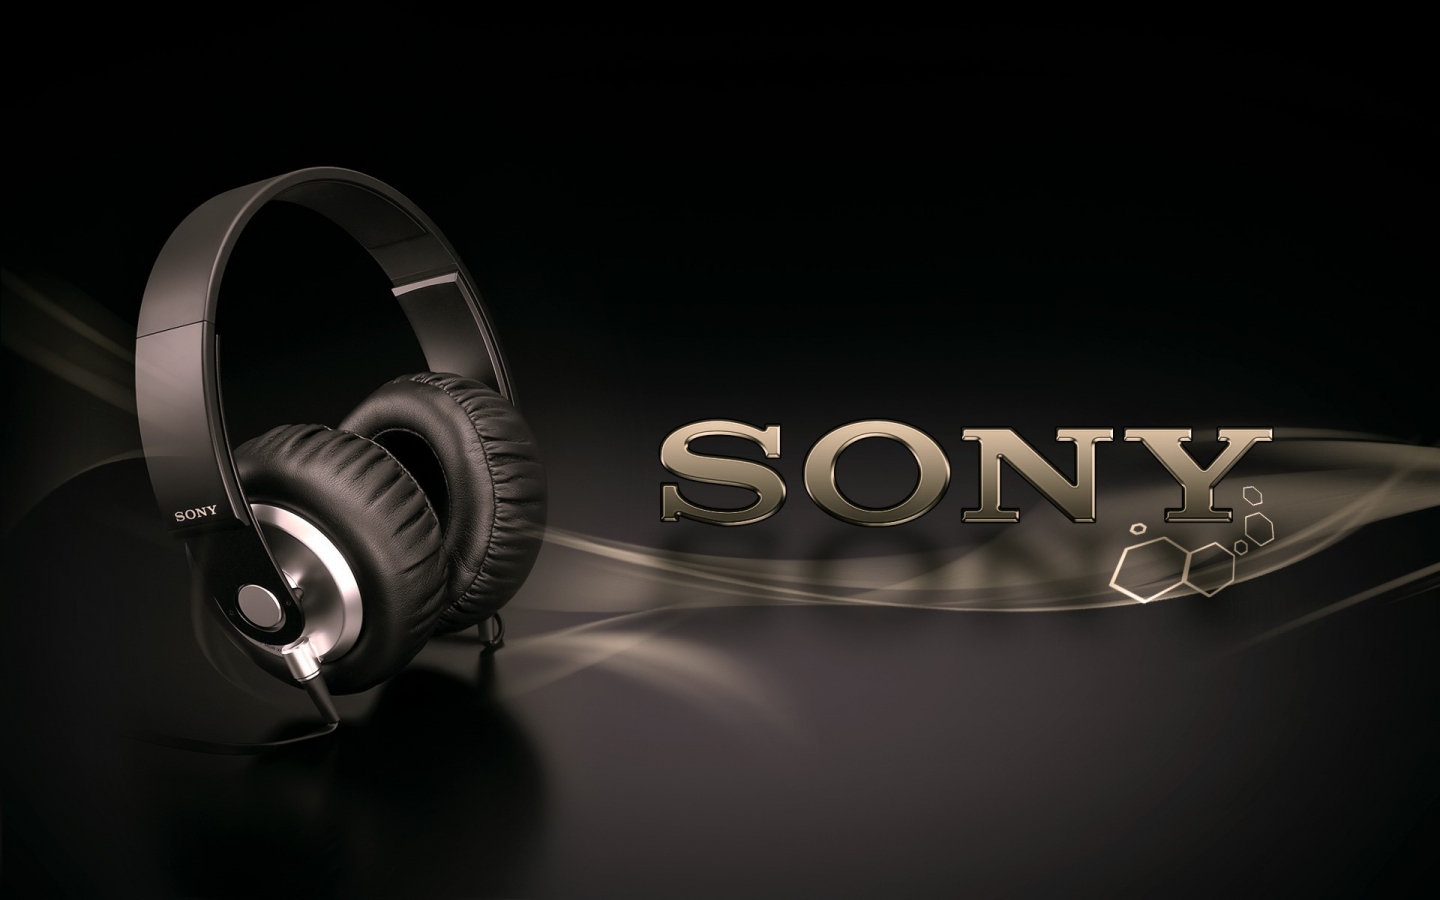 Professional Sony Headphones for 1440 x 900 widescreen resolution